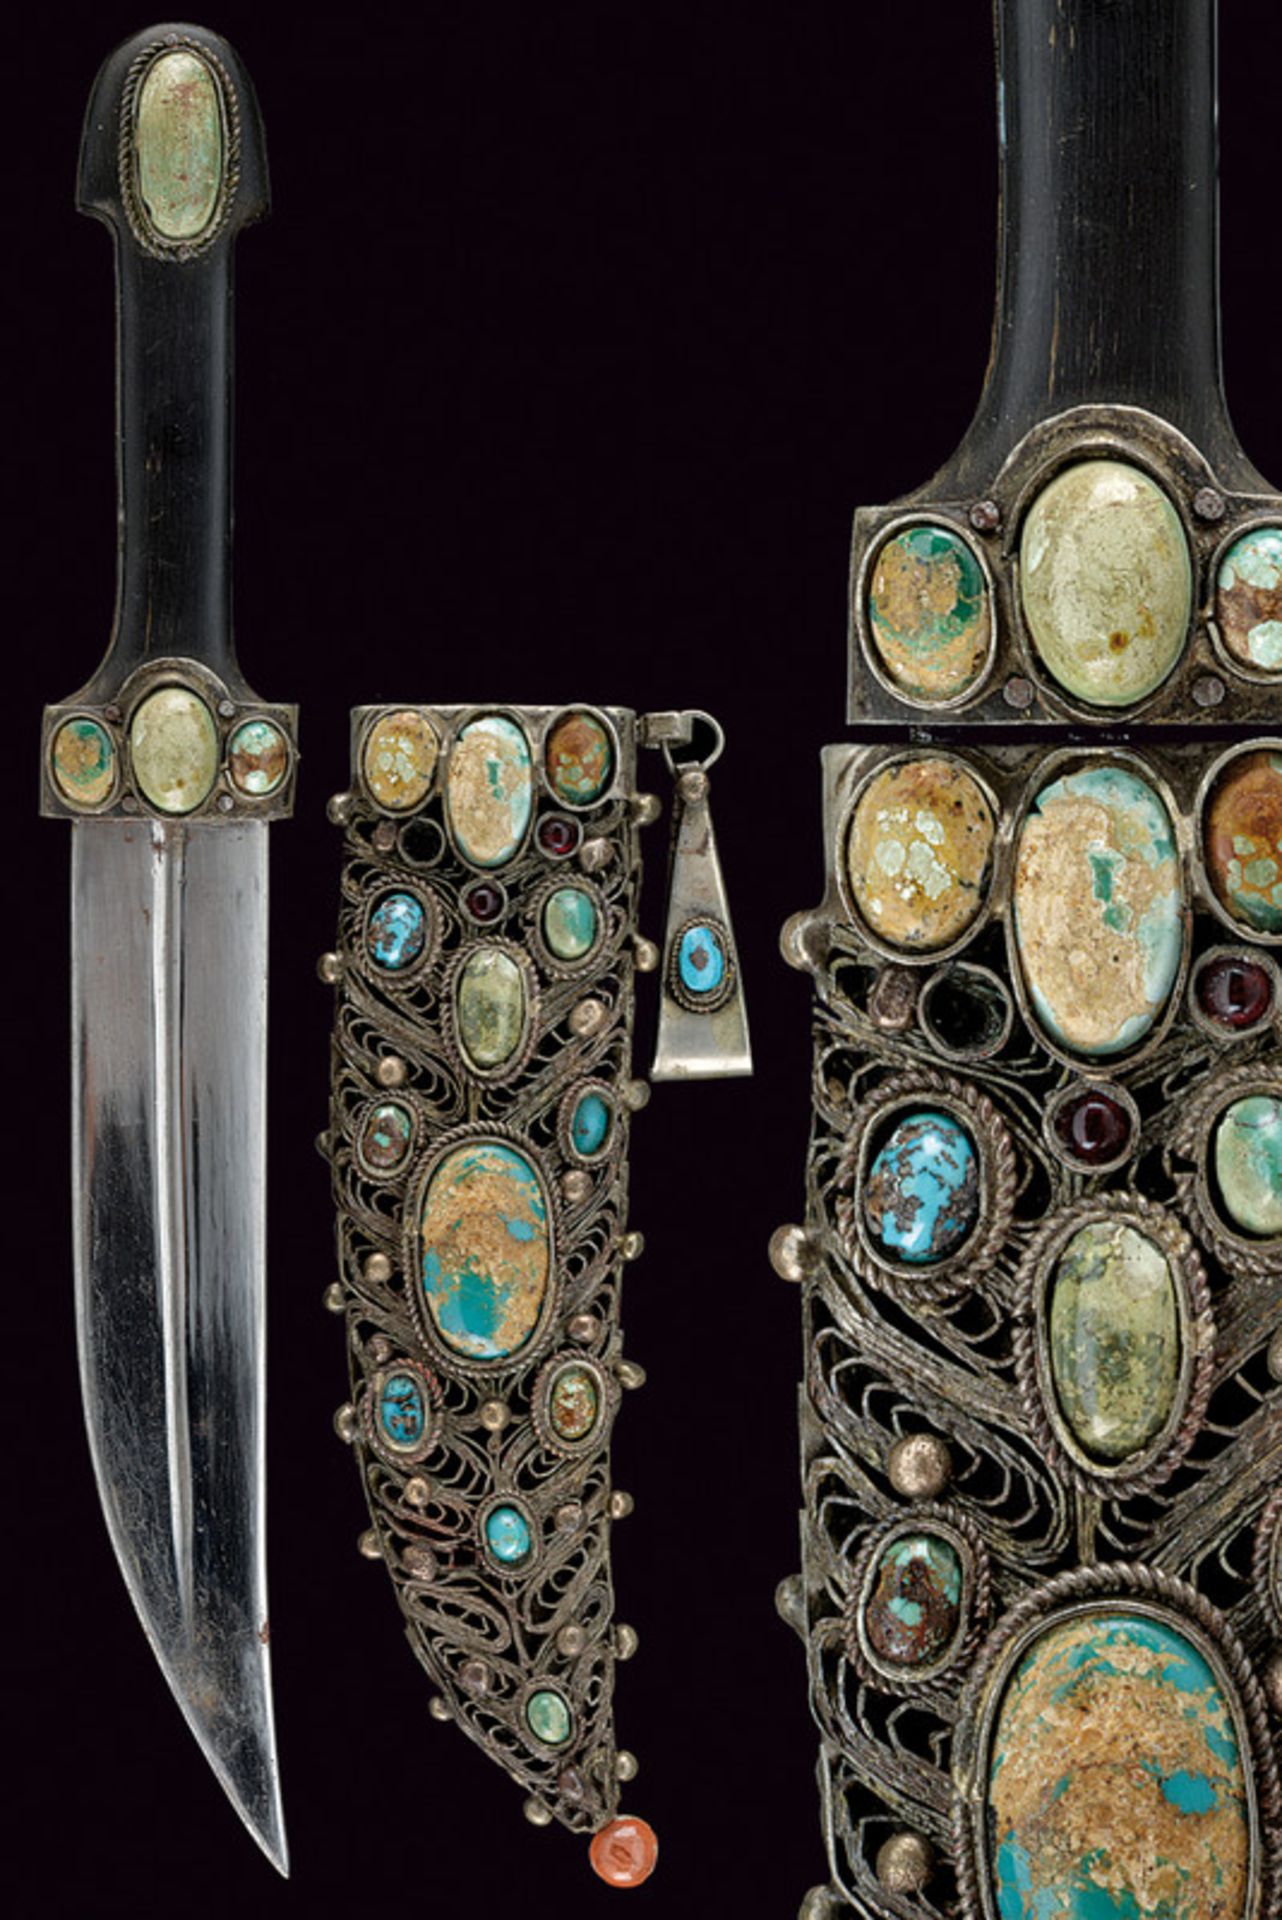 A Bebut style dagger, dating: circa 1900, provenance: Indopersia, dating: circa 1900, provenance: